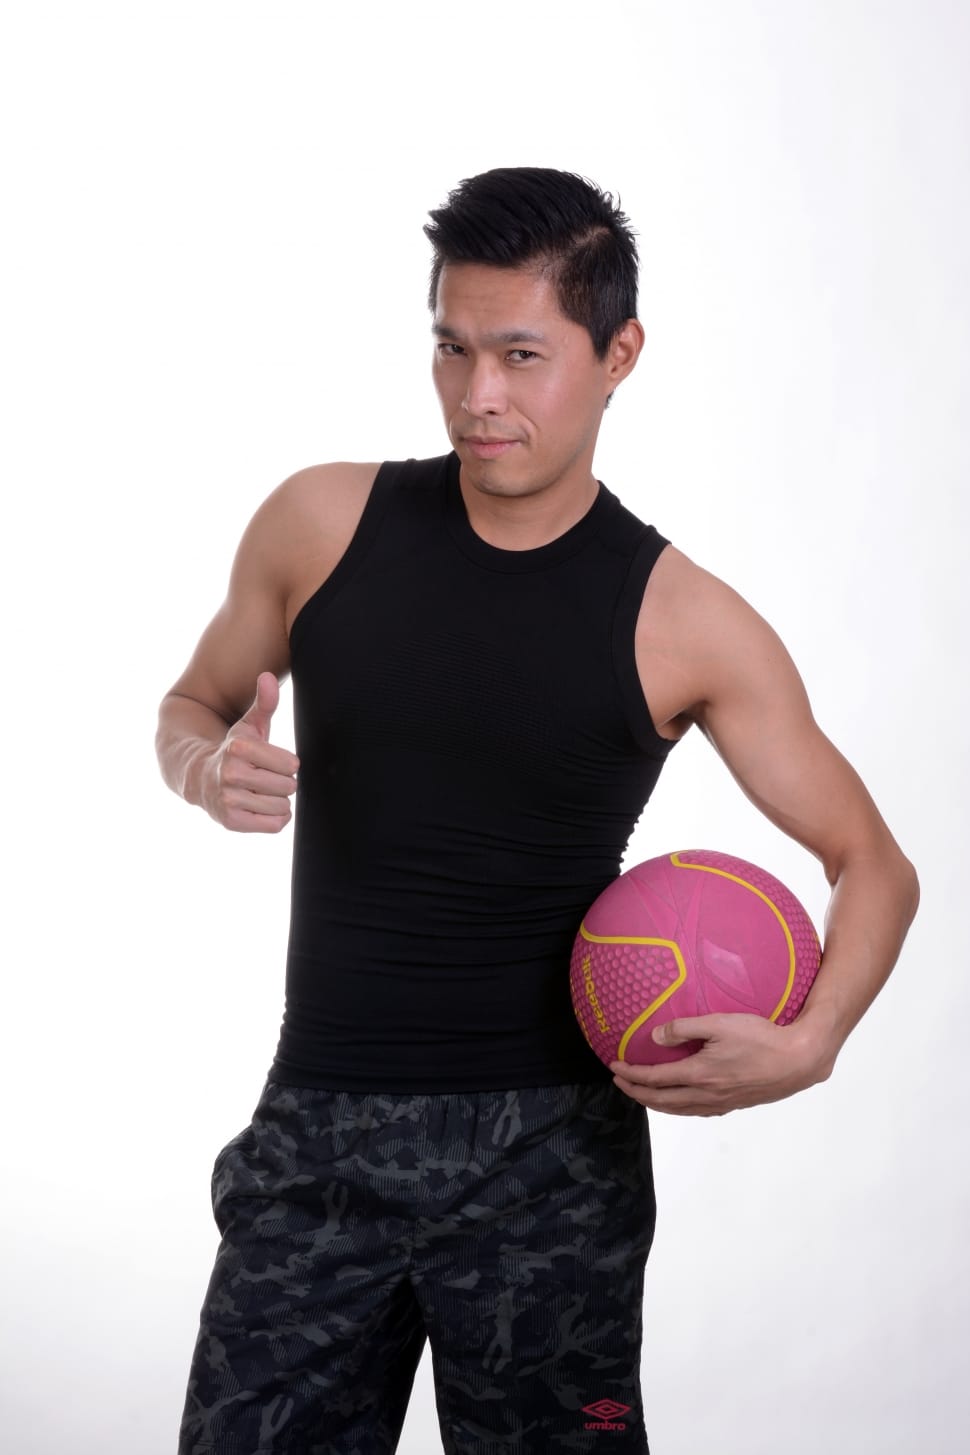 men's black sleeveless crew neck shirt, black-and-gray bottoms with pink exercise ball preview